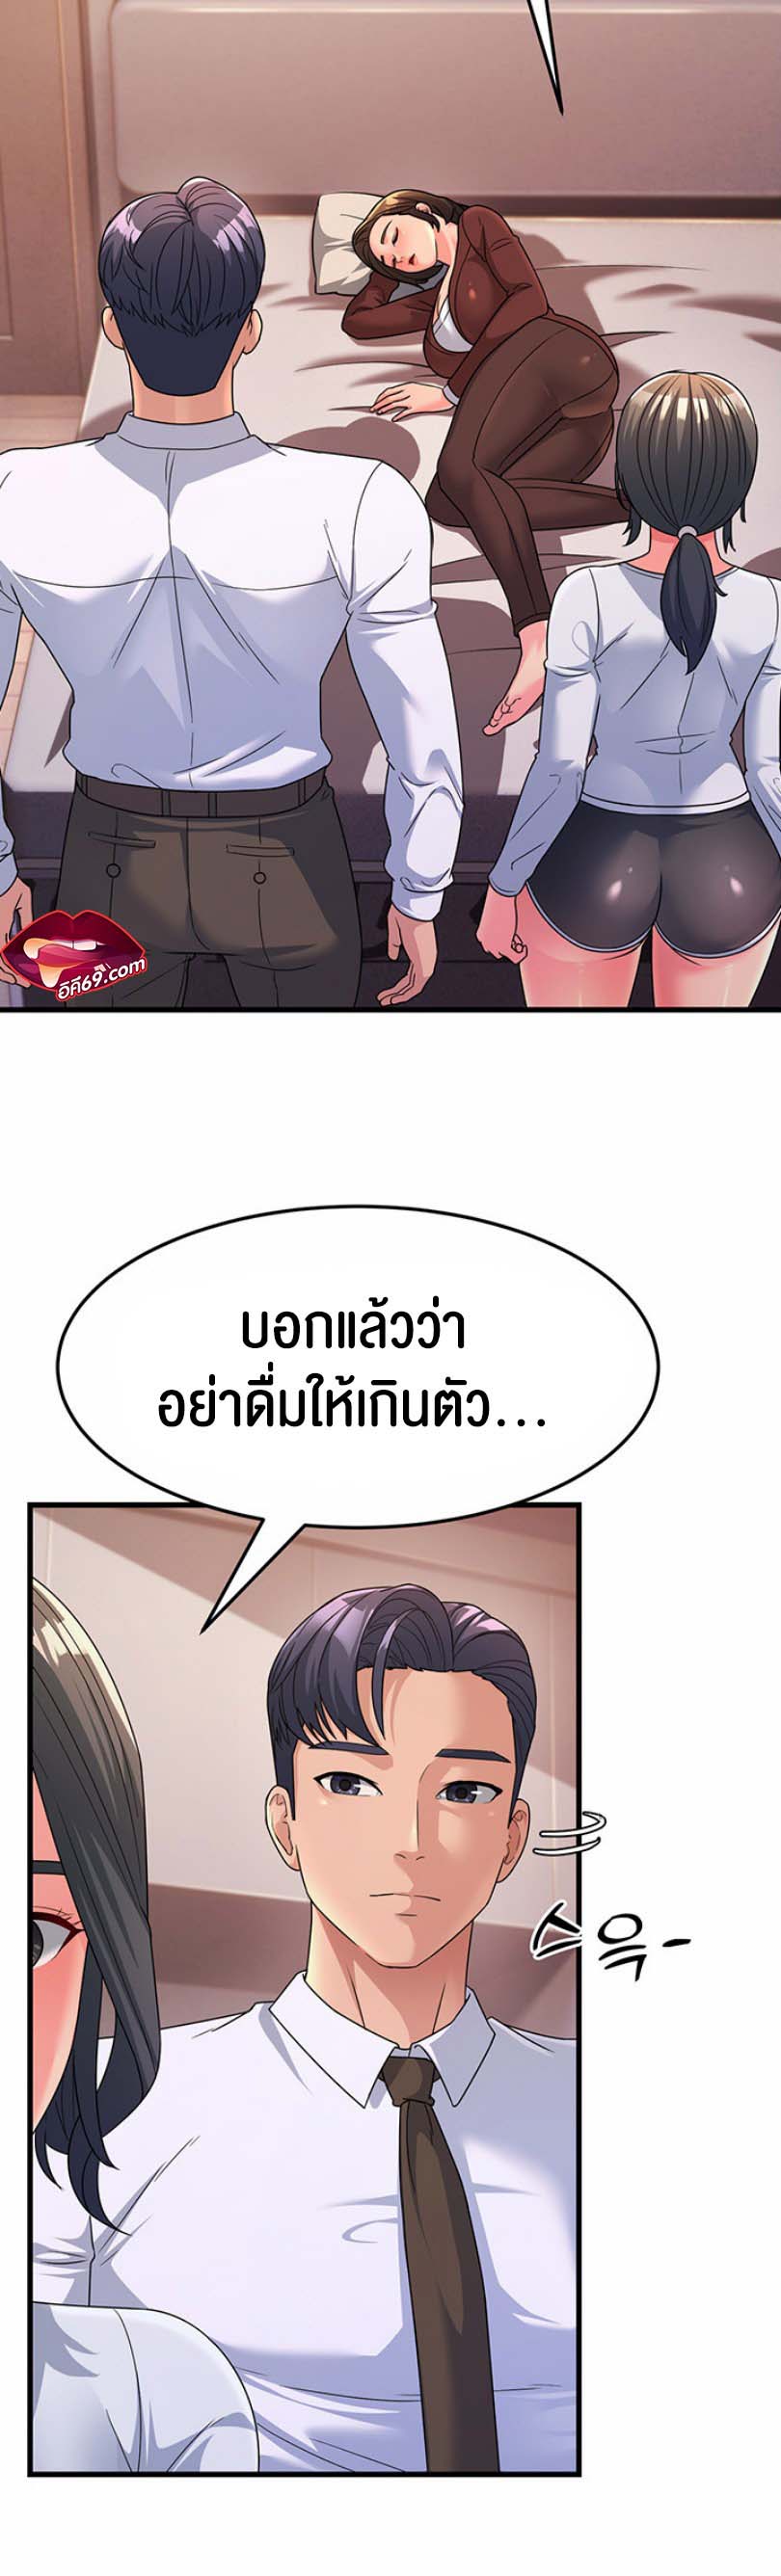 à¸­à¹ˆà¸²à¸™à¹‚à¸”à¸ˆà¸´à¸™ à¹€à¸£à¸·à¹ˆà¸­à¸‡ Mother in Law Bends To My Will 9 45